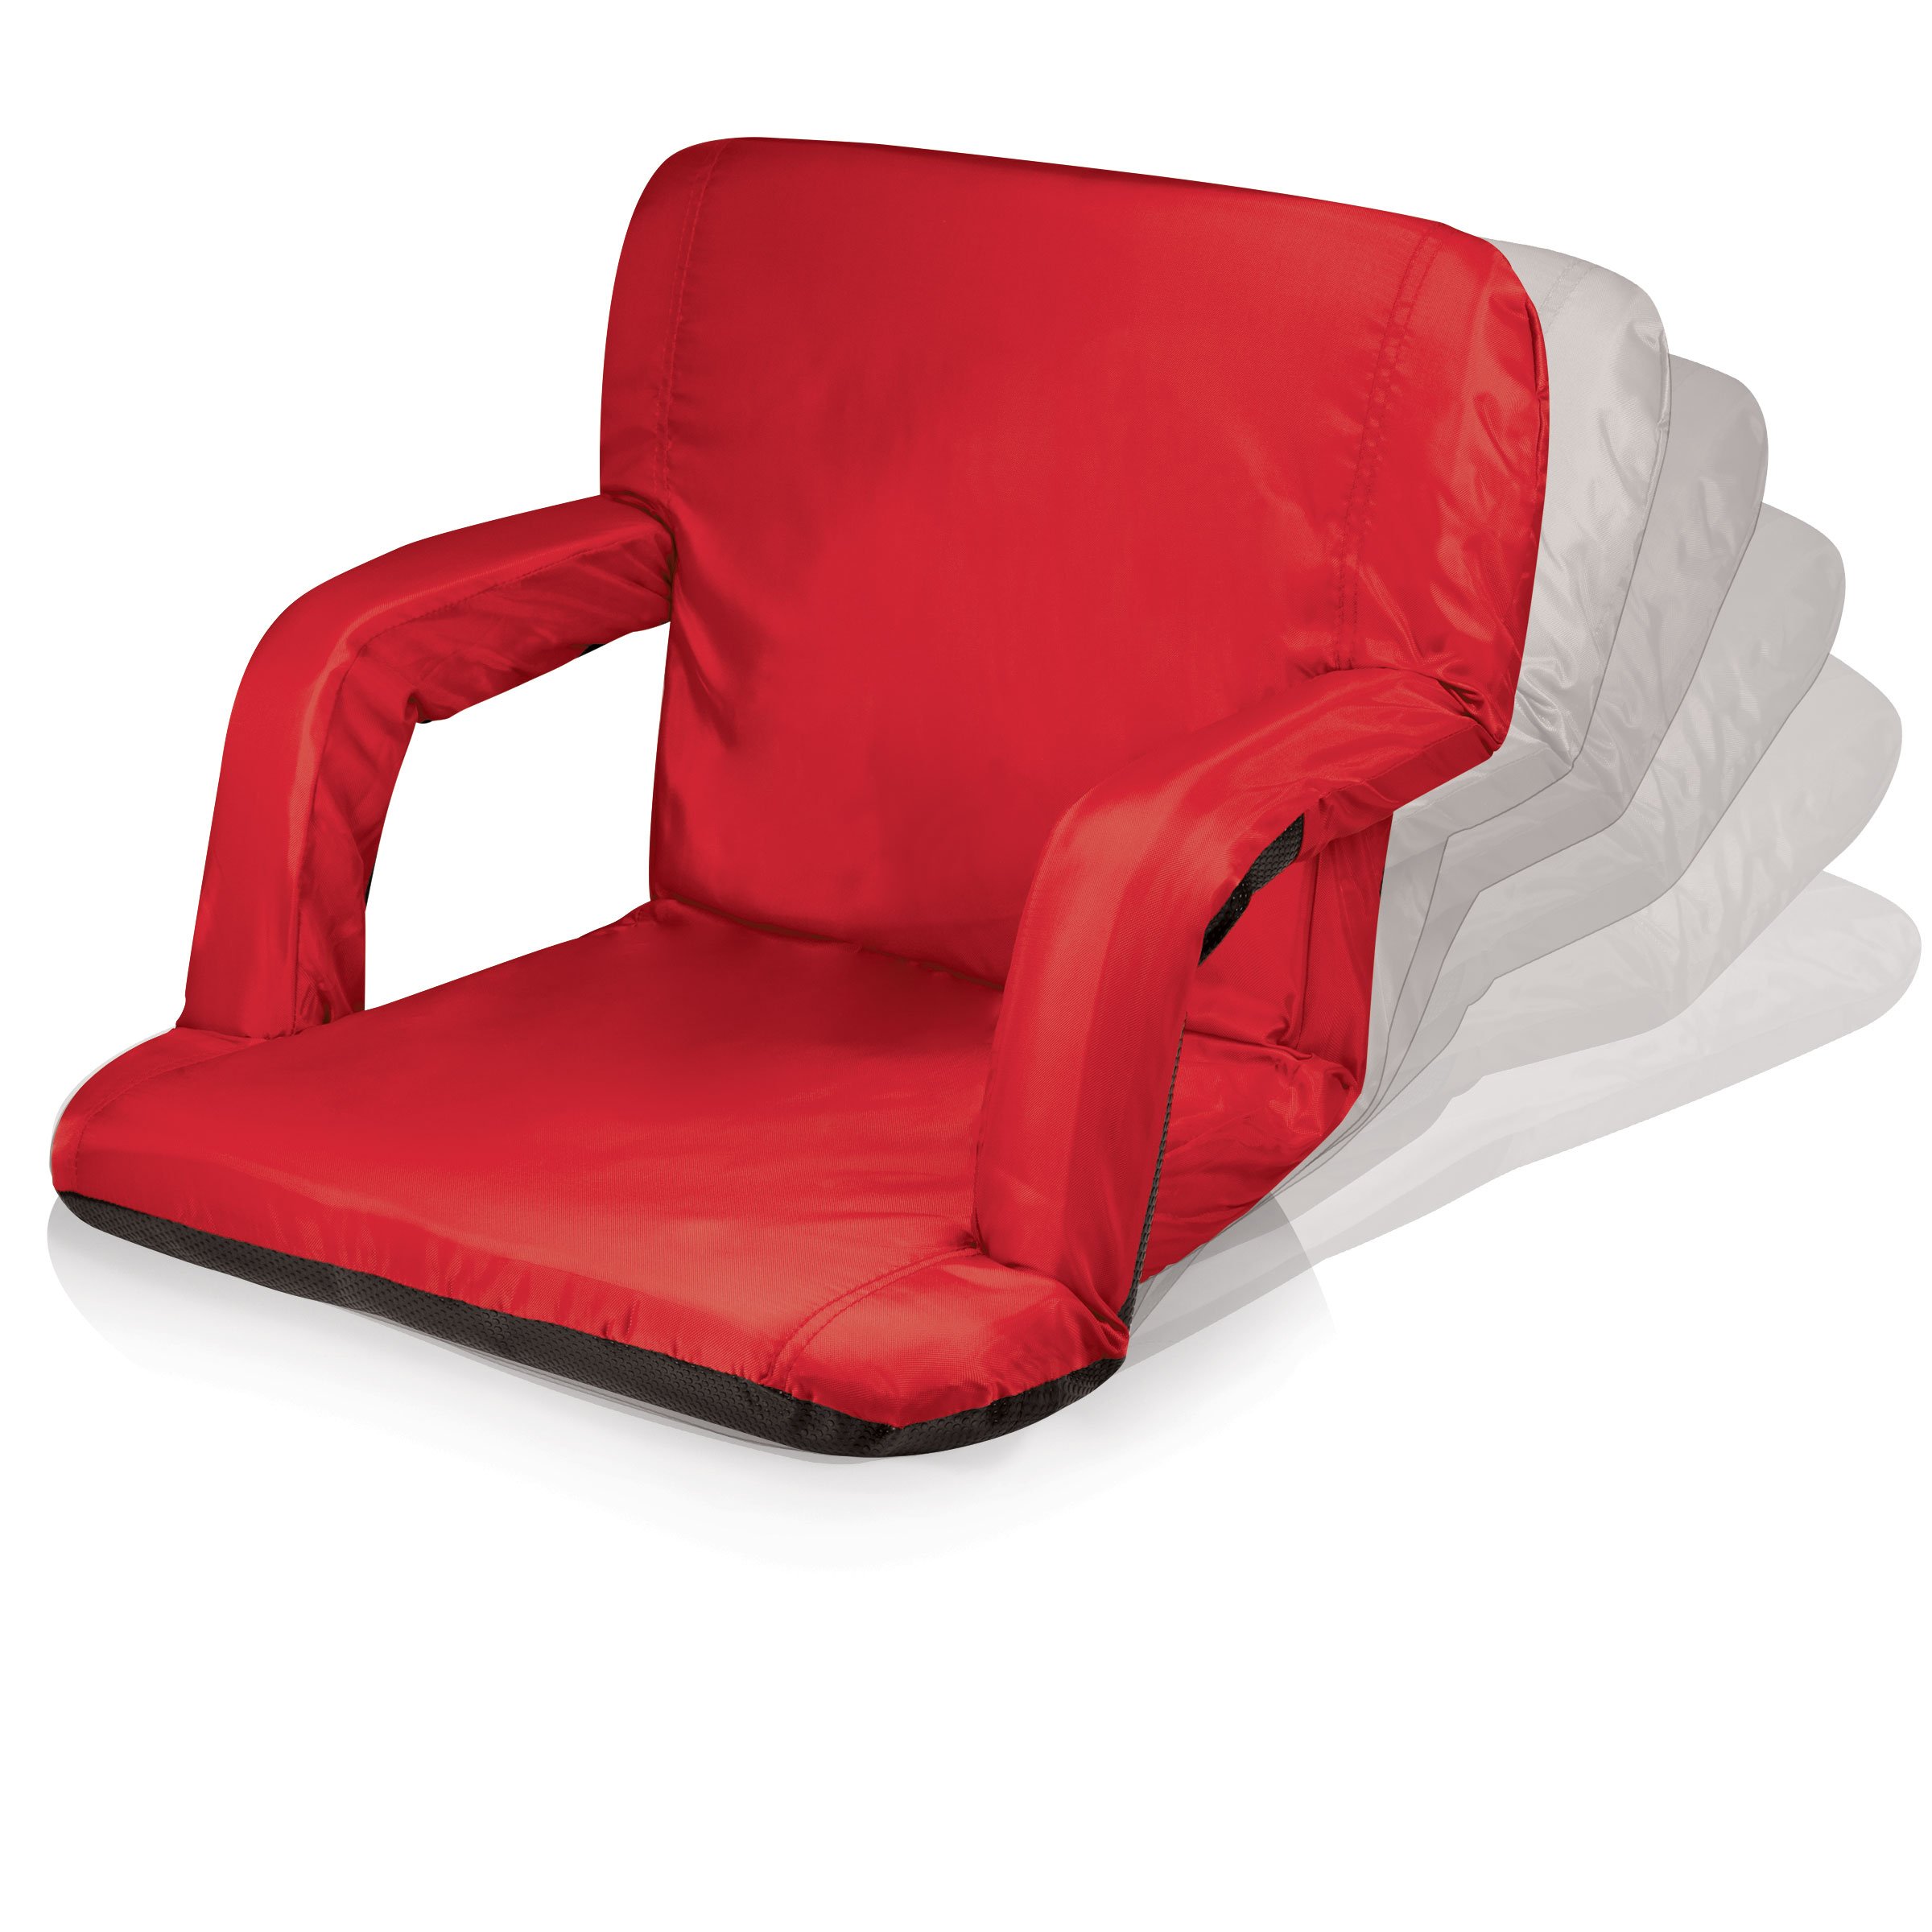 Picnic Time ONIVA - a Picnic Time brand Ventura Reclining Stadium Seat with Back Support - Bleacher Seat - Beach Floor Chair, (Red)